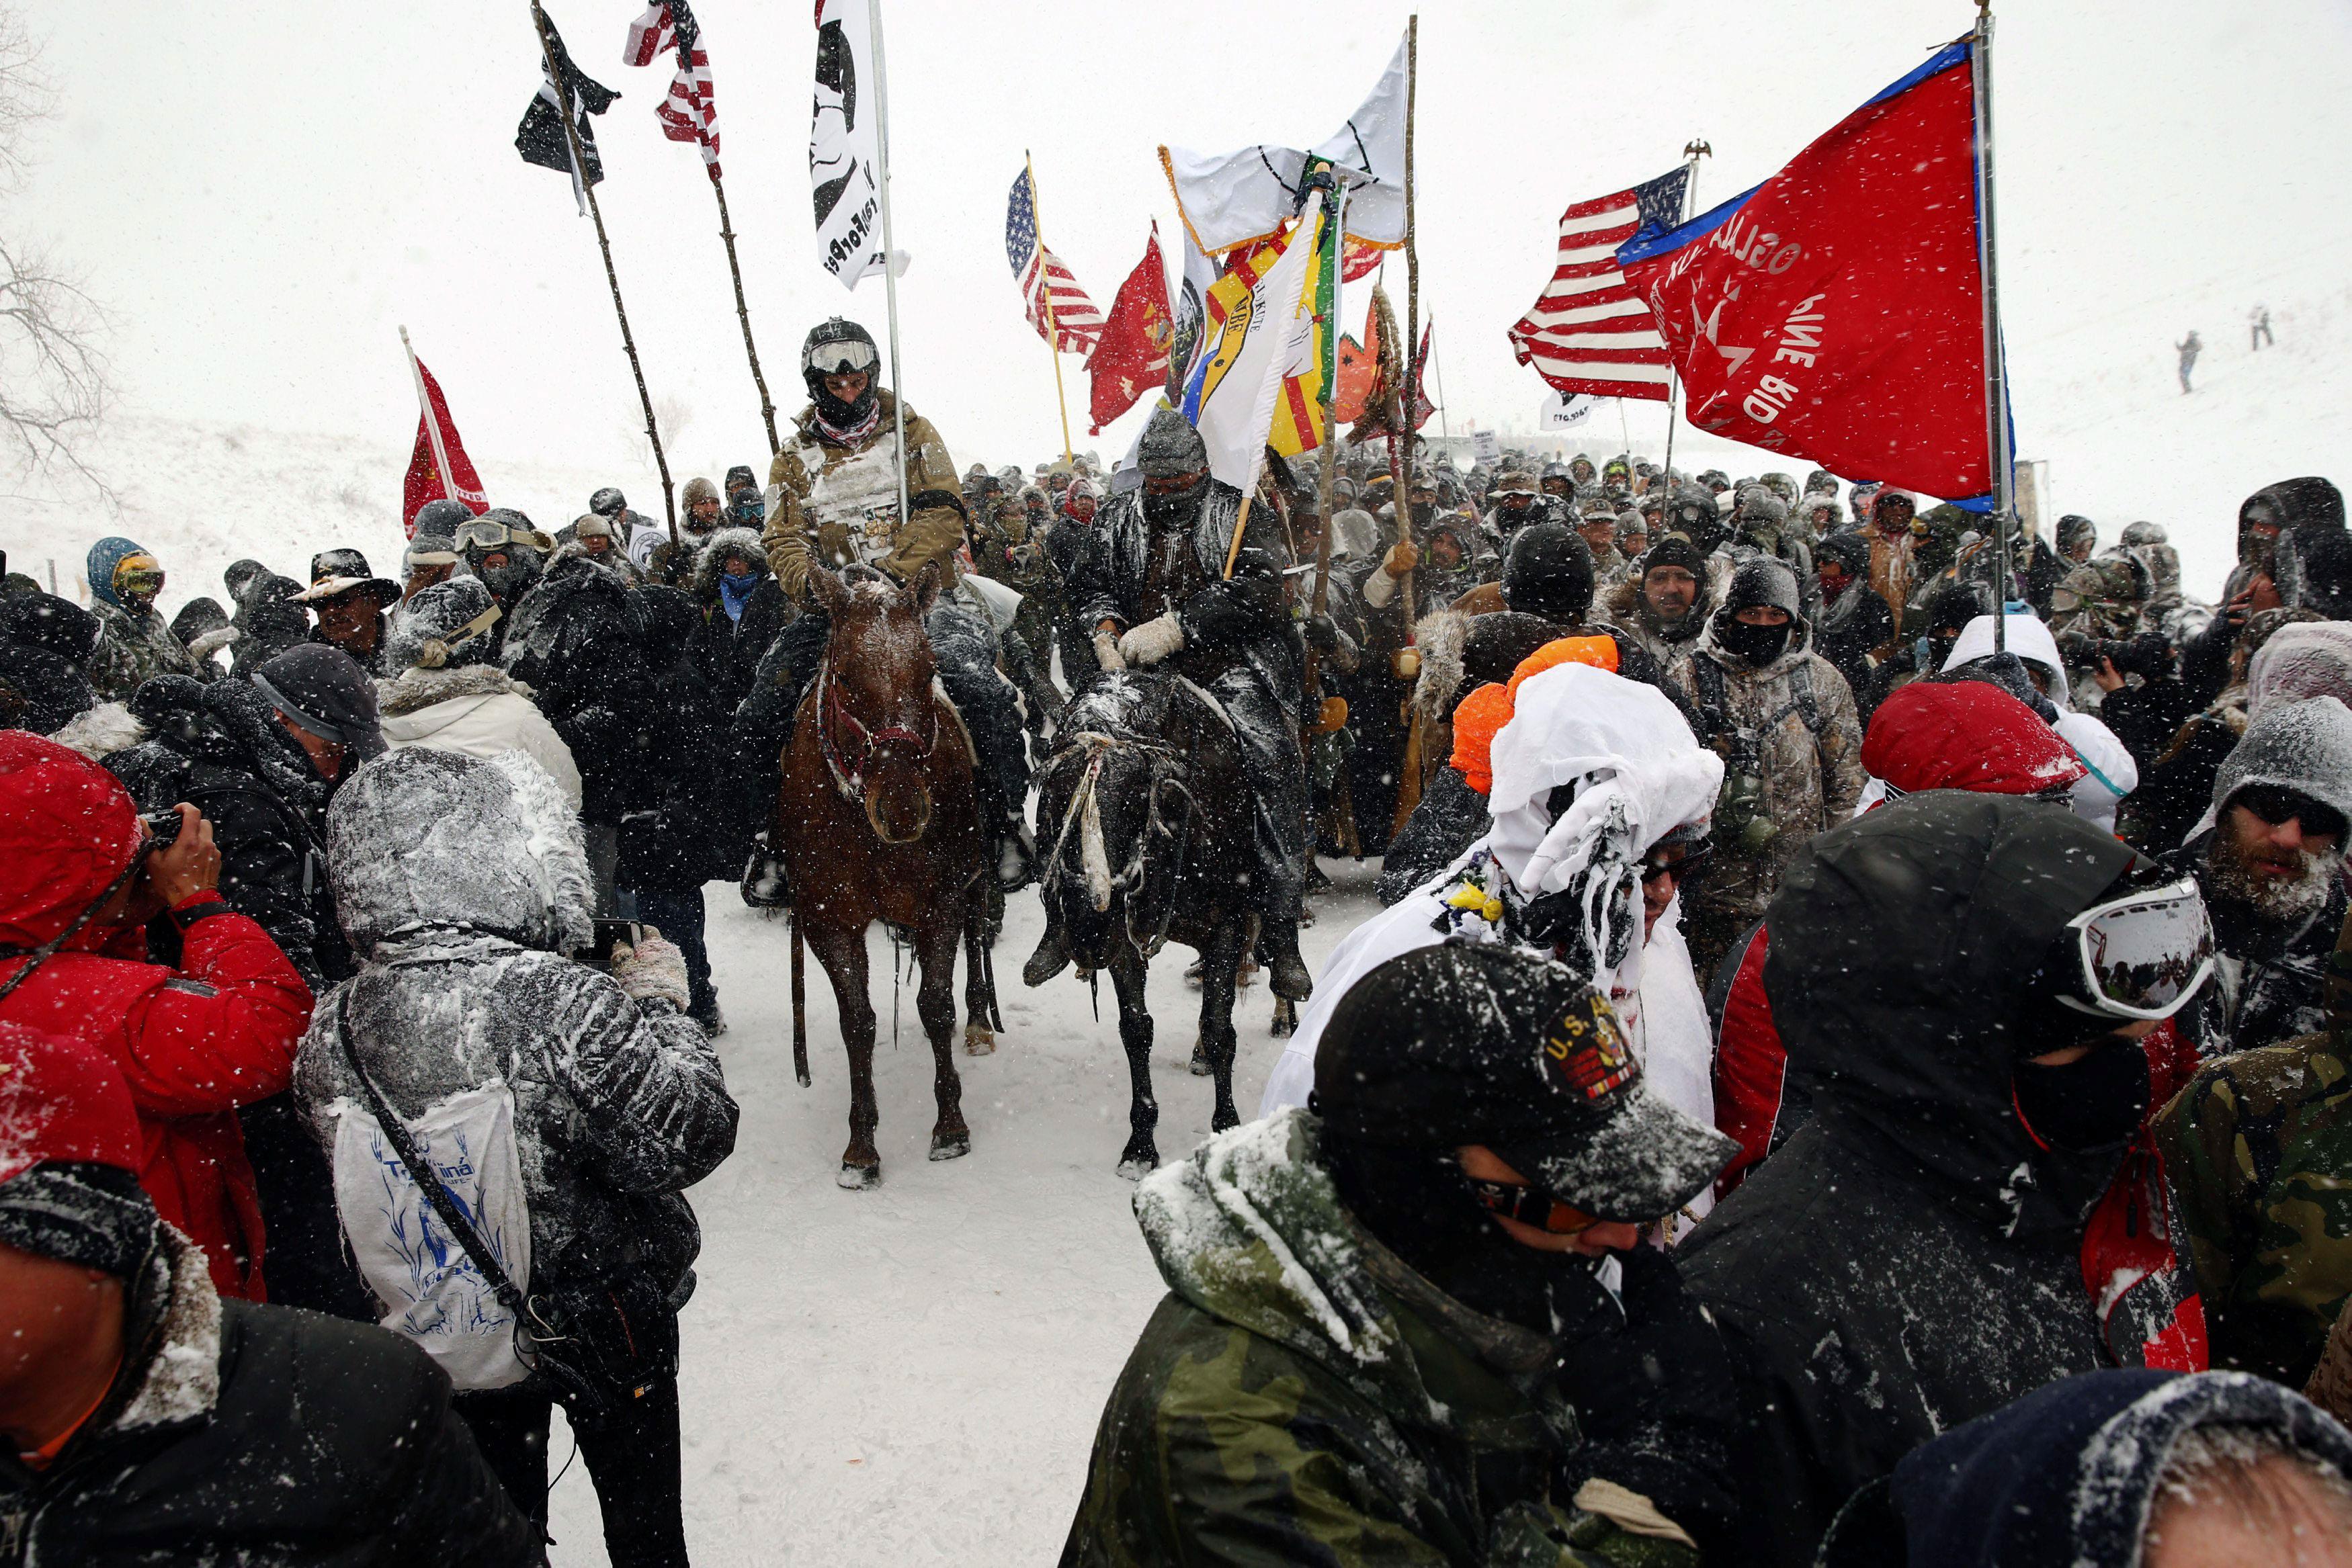 Veterans march with activists near Backwater Bridge just outside the Oceti Sakowin camp during a sno